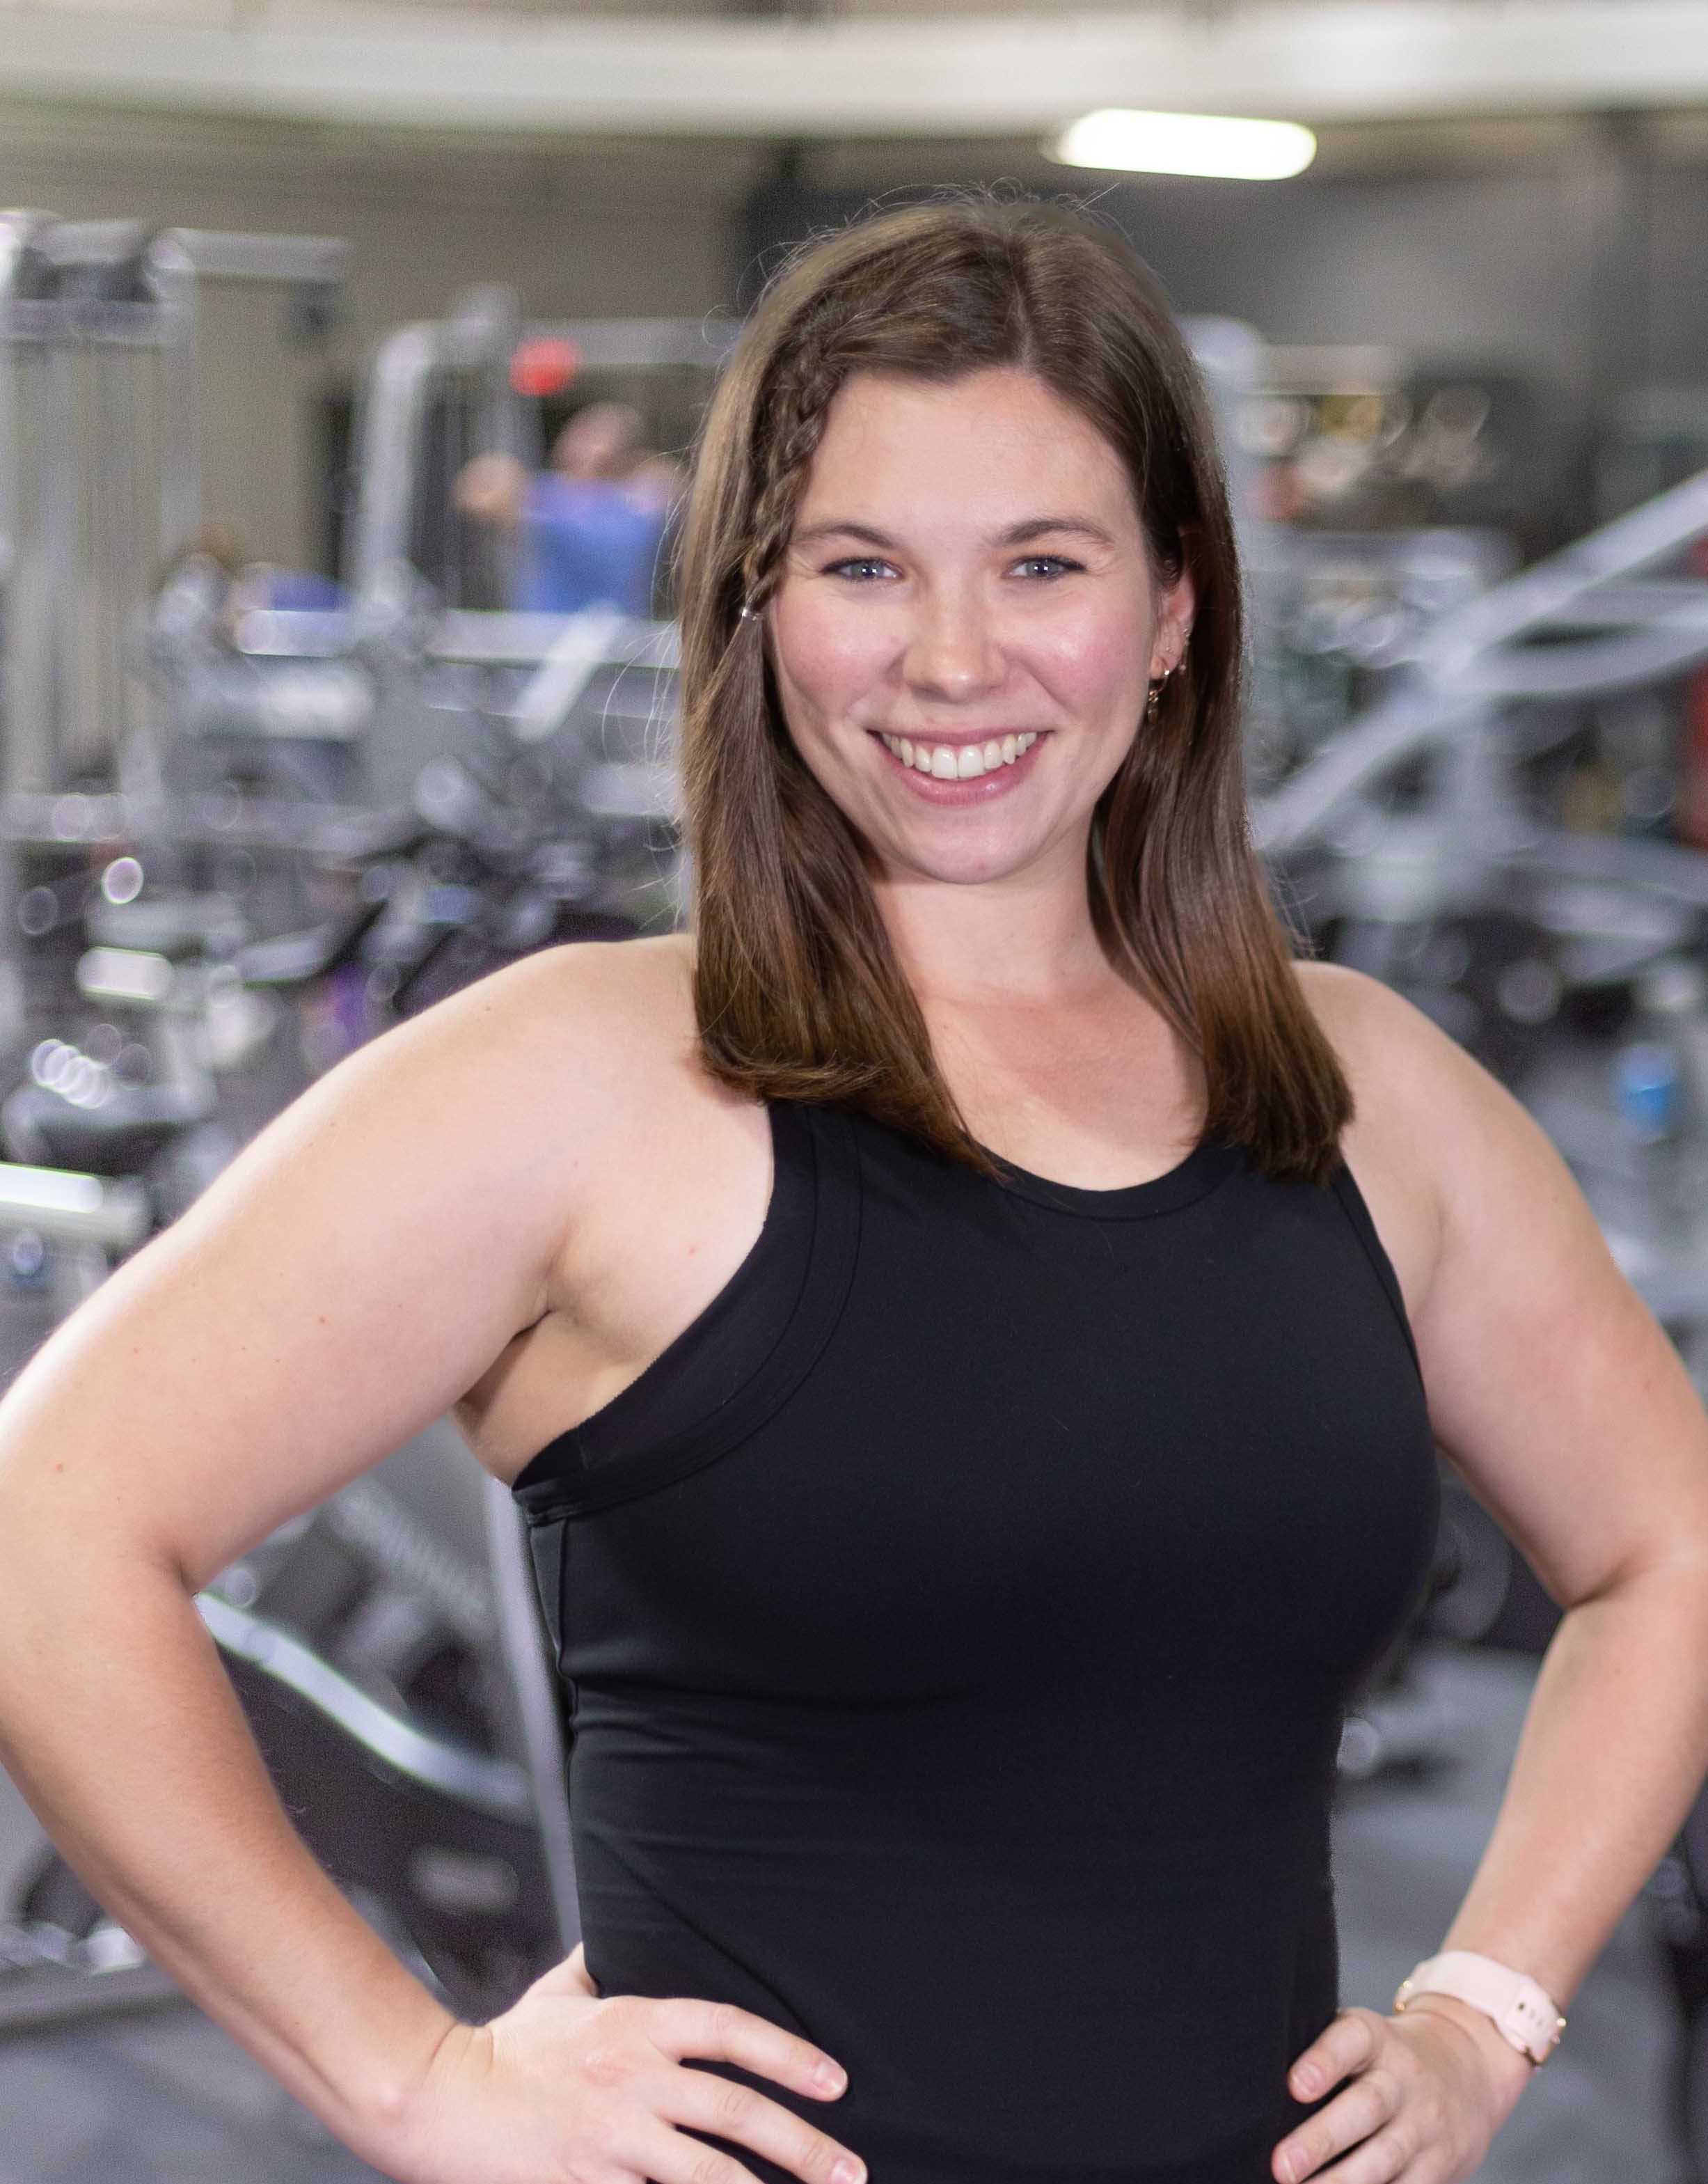 https://www.conwayregionalhfc.org/images/default-source/hfc/personal-trainers/audrey_pt-headshot.jpg?sfvrsn=e8bf2538_3